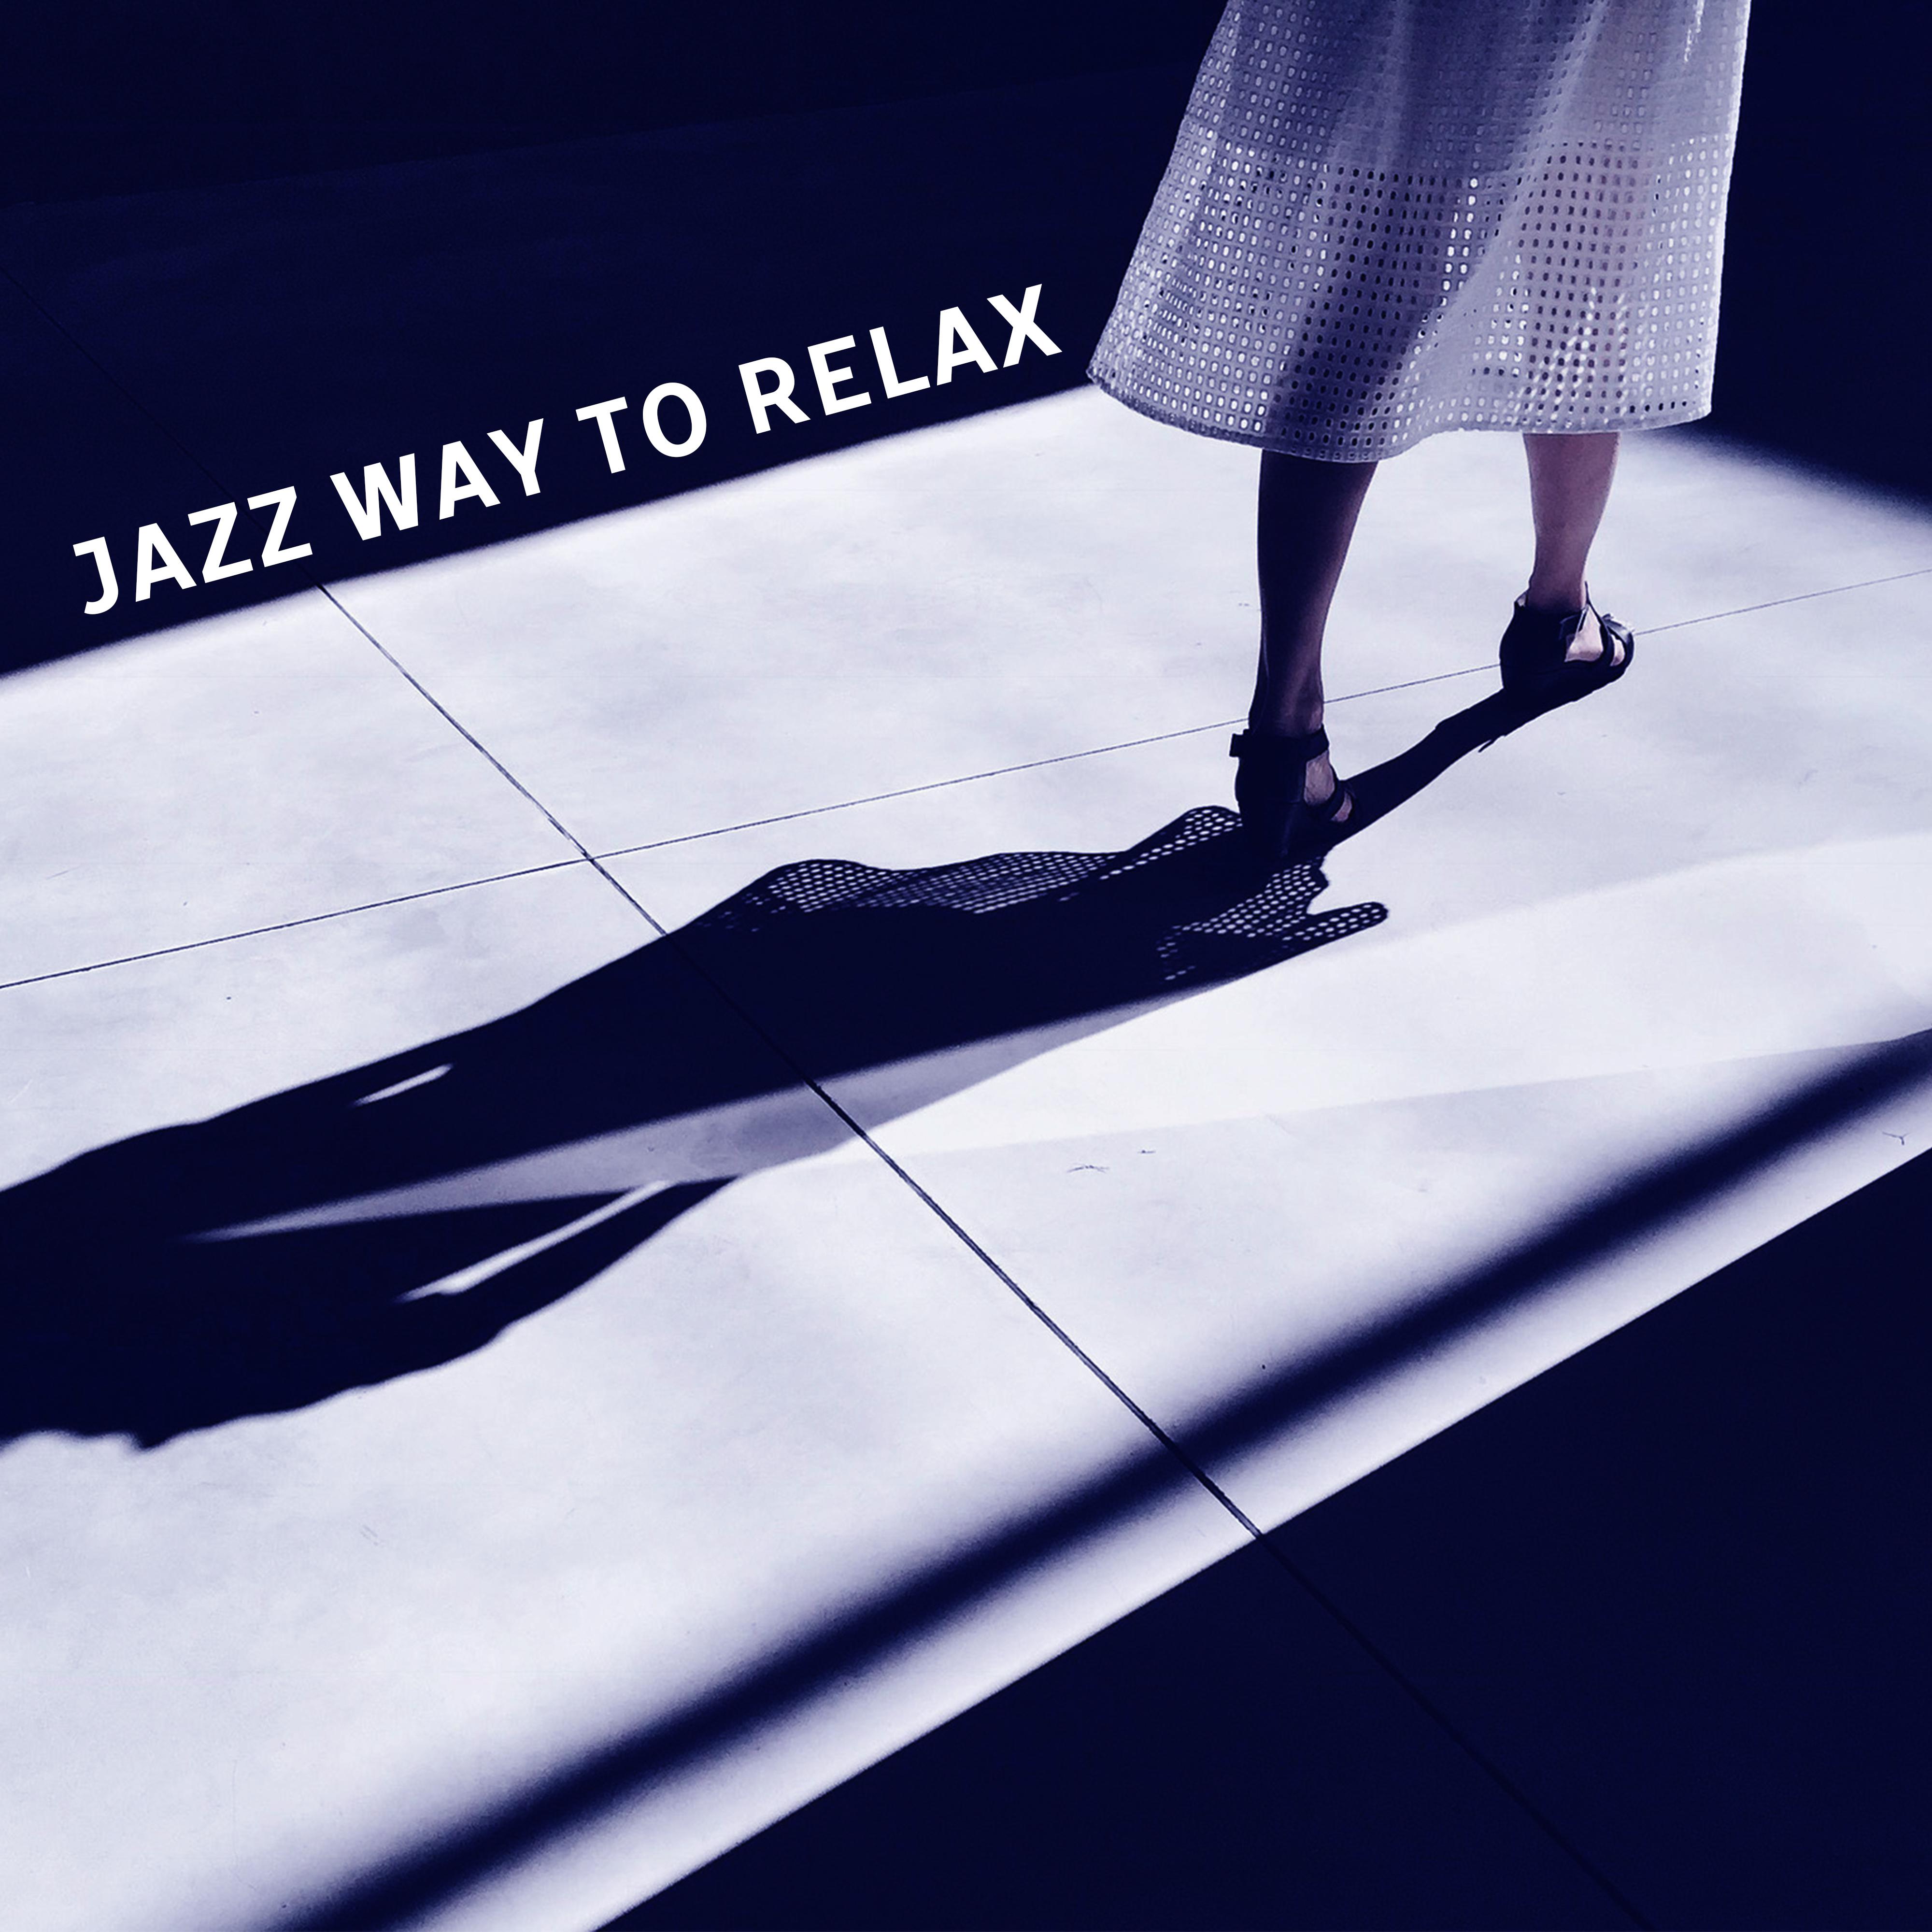 Jazz Way to Relax – Rest with Jazz, Smooth Piano Sounds, Note to Myself, Blue Moon